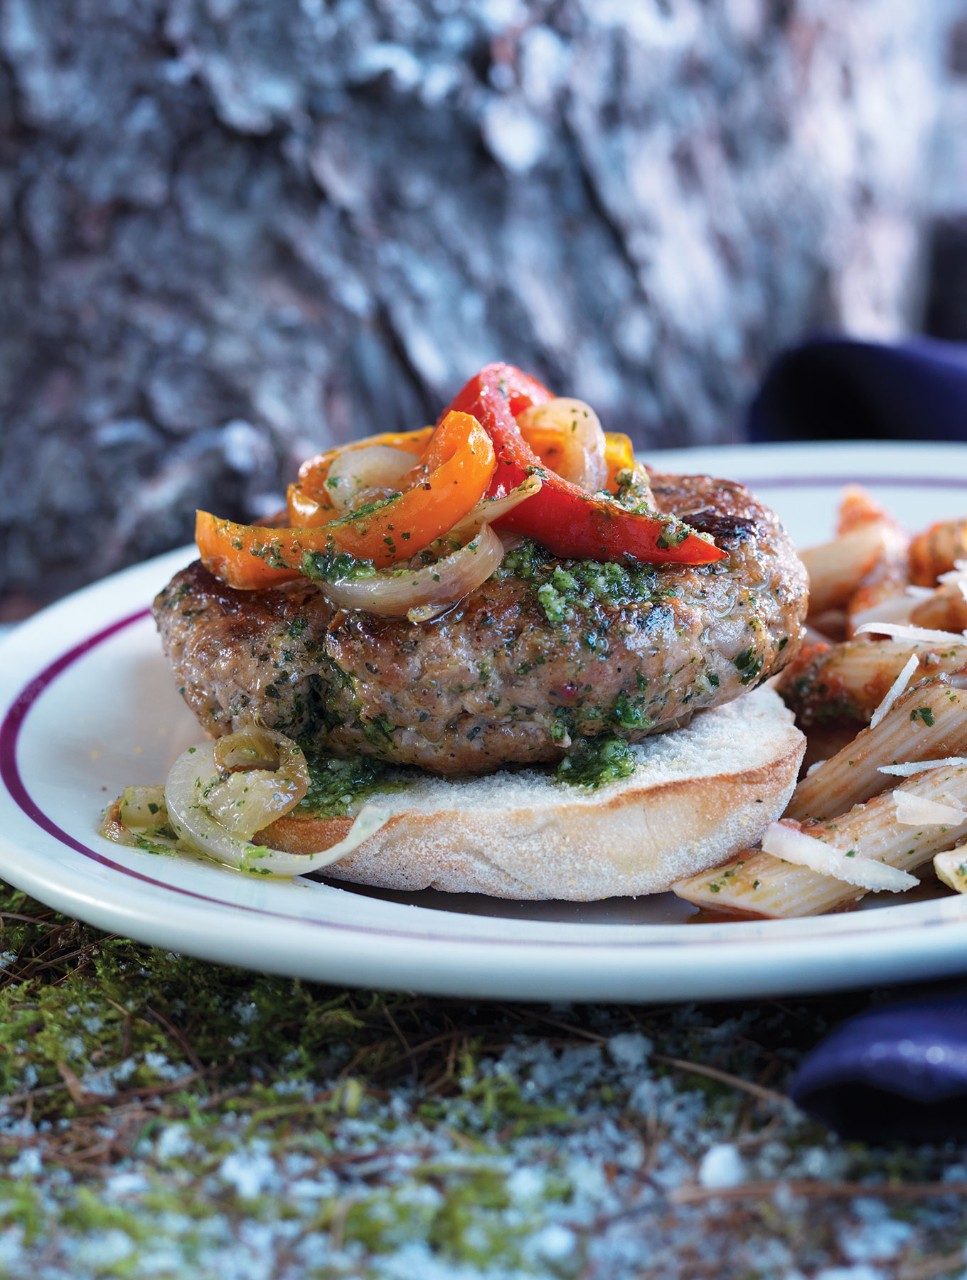 Italian Sausage Burgers with Peppers, Pesto & Penne